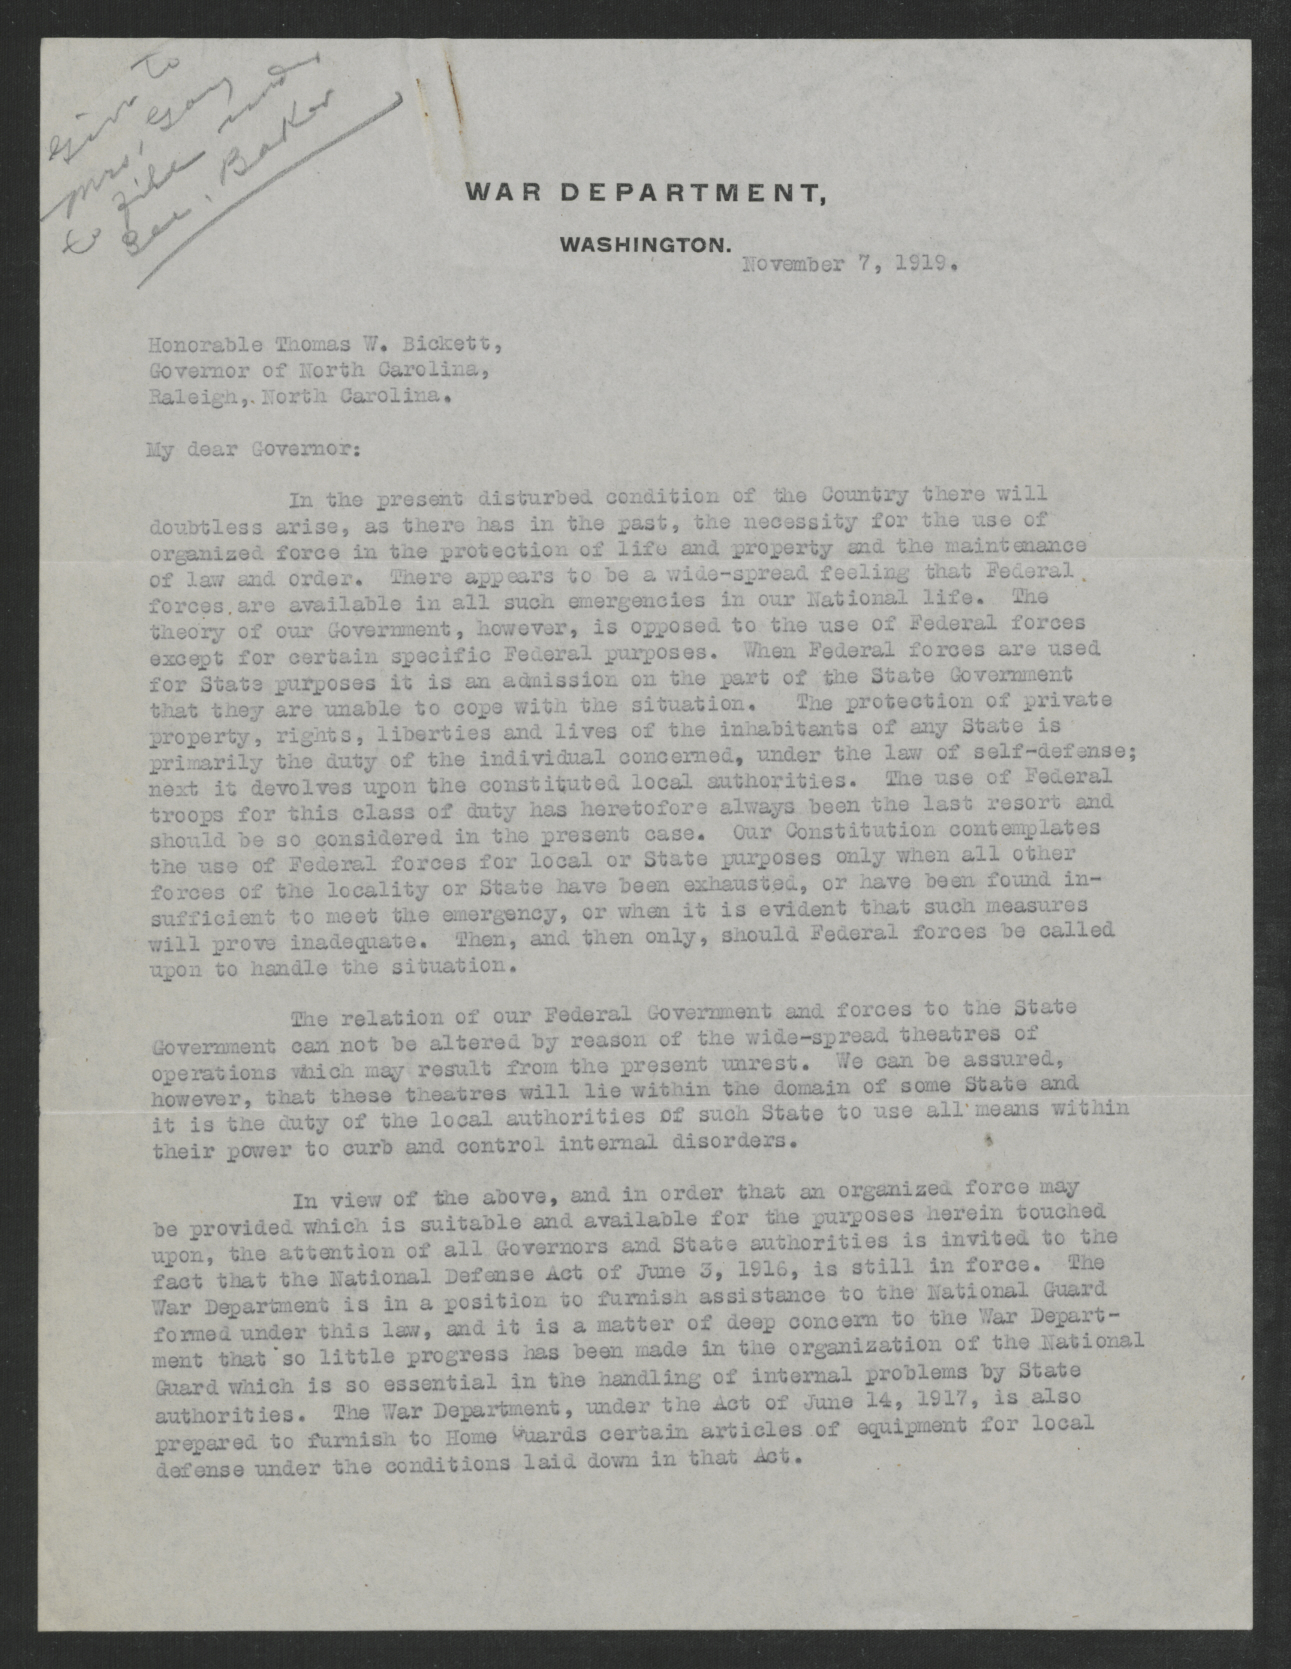 Letter from Newton D. Baker to Thomas W. Bickett, November 7, 1919, page 1